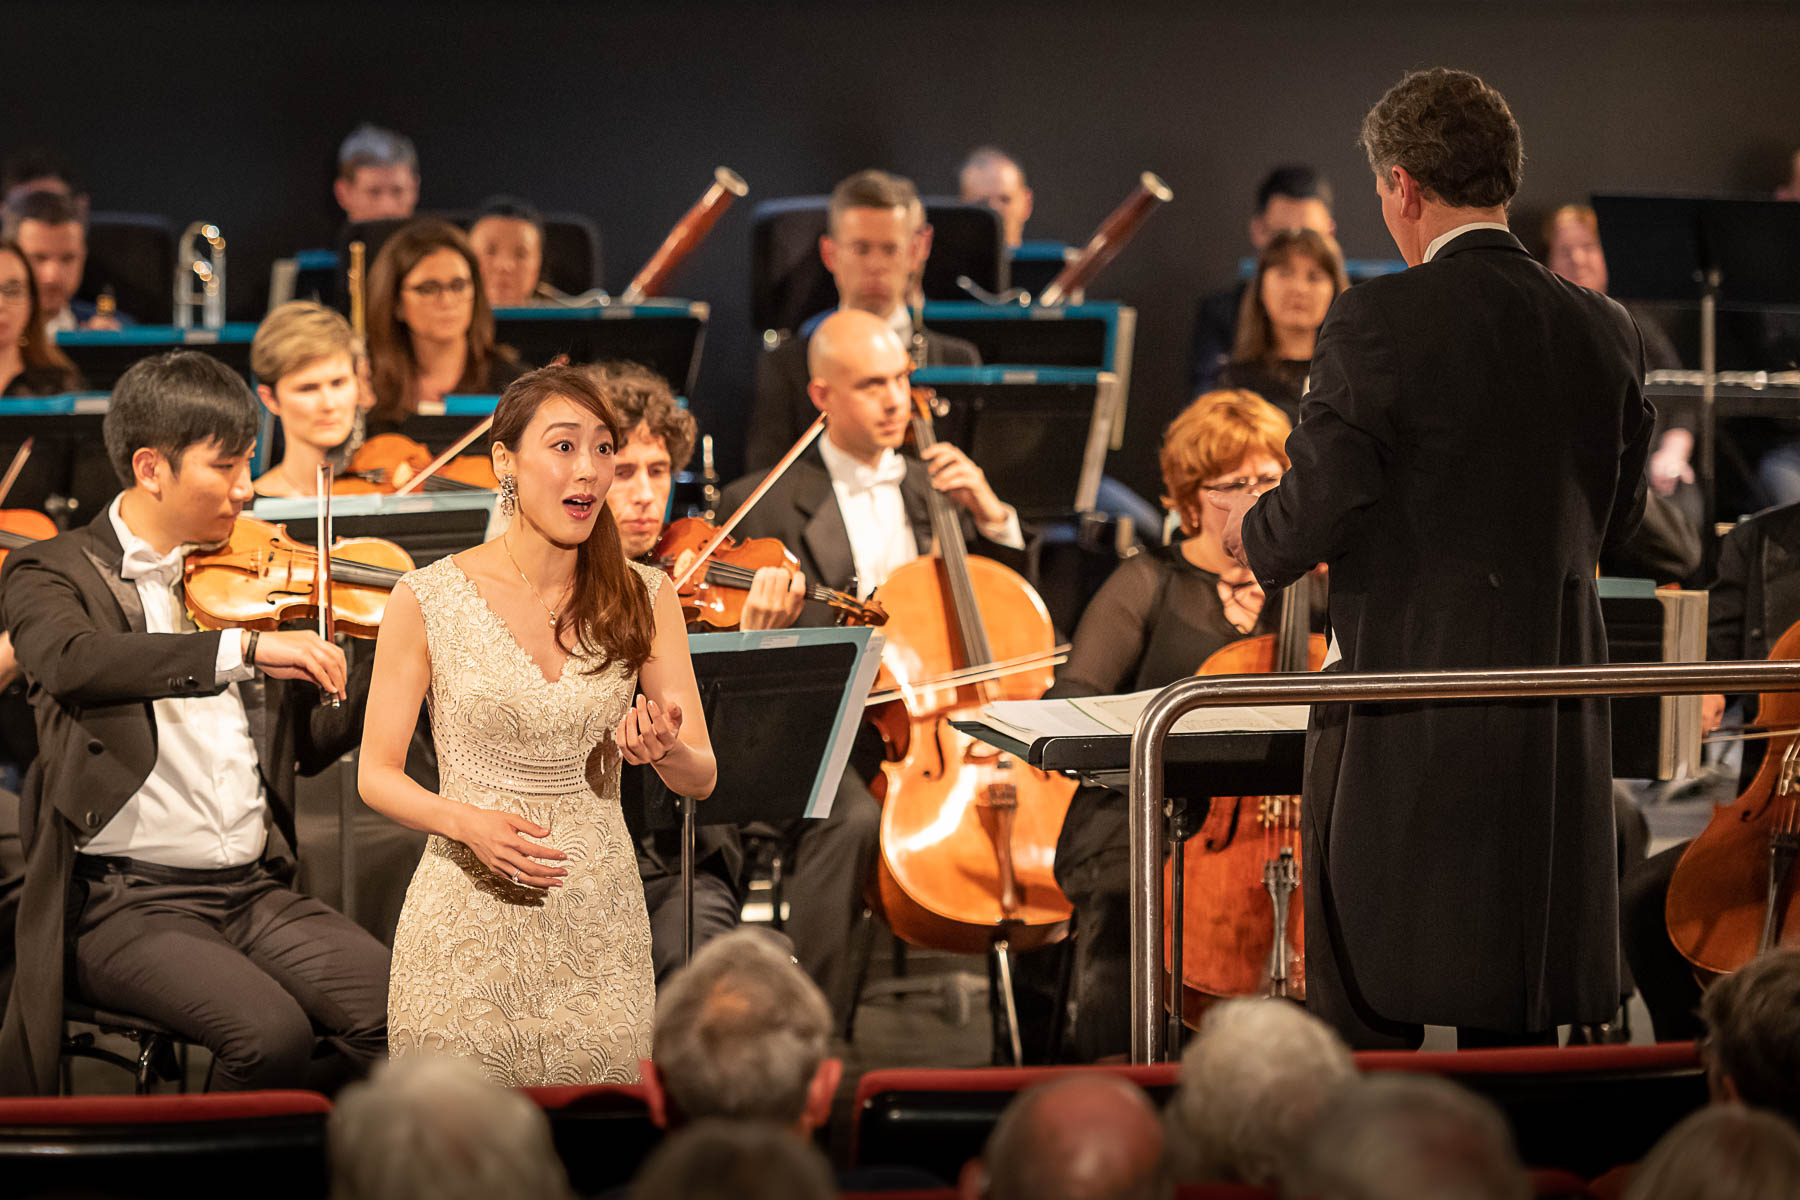 Sydney-based Japanese soprano singer Ayako Ohtake performs with an orchestra.